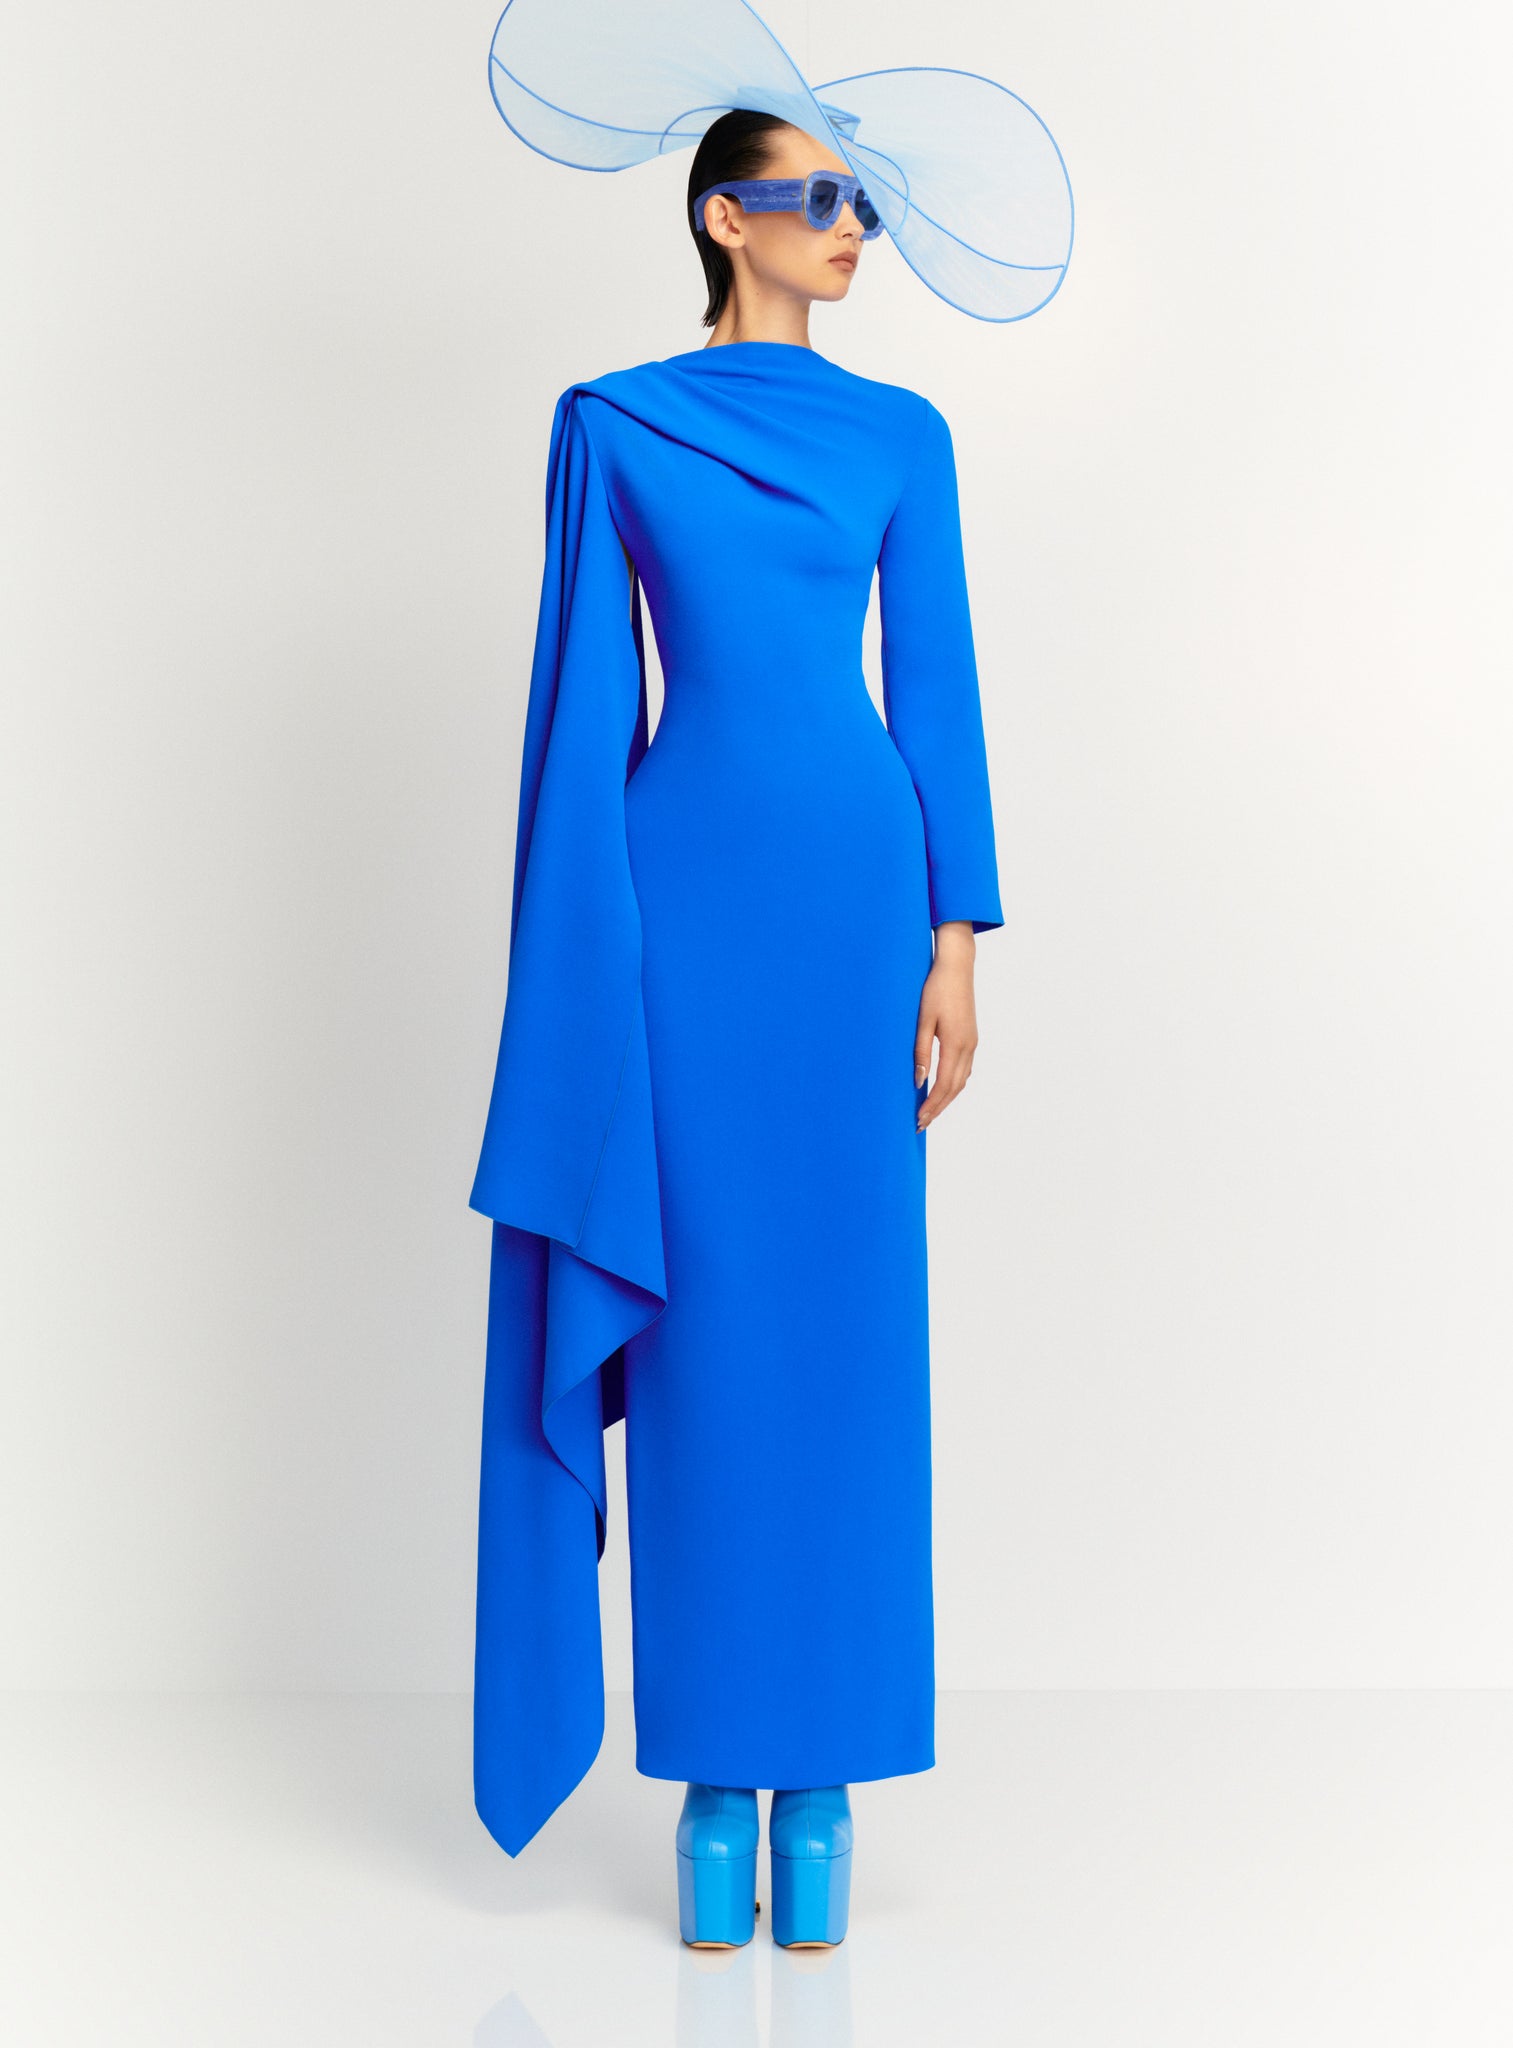 The Lydia Maxi Dress in Blue